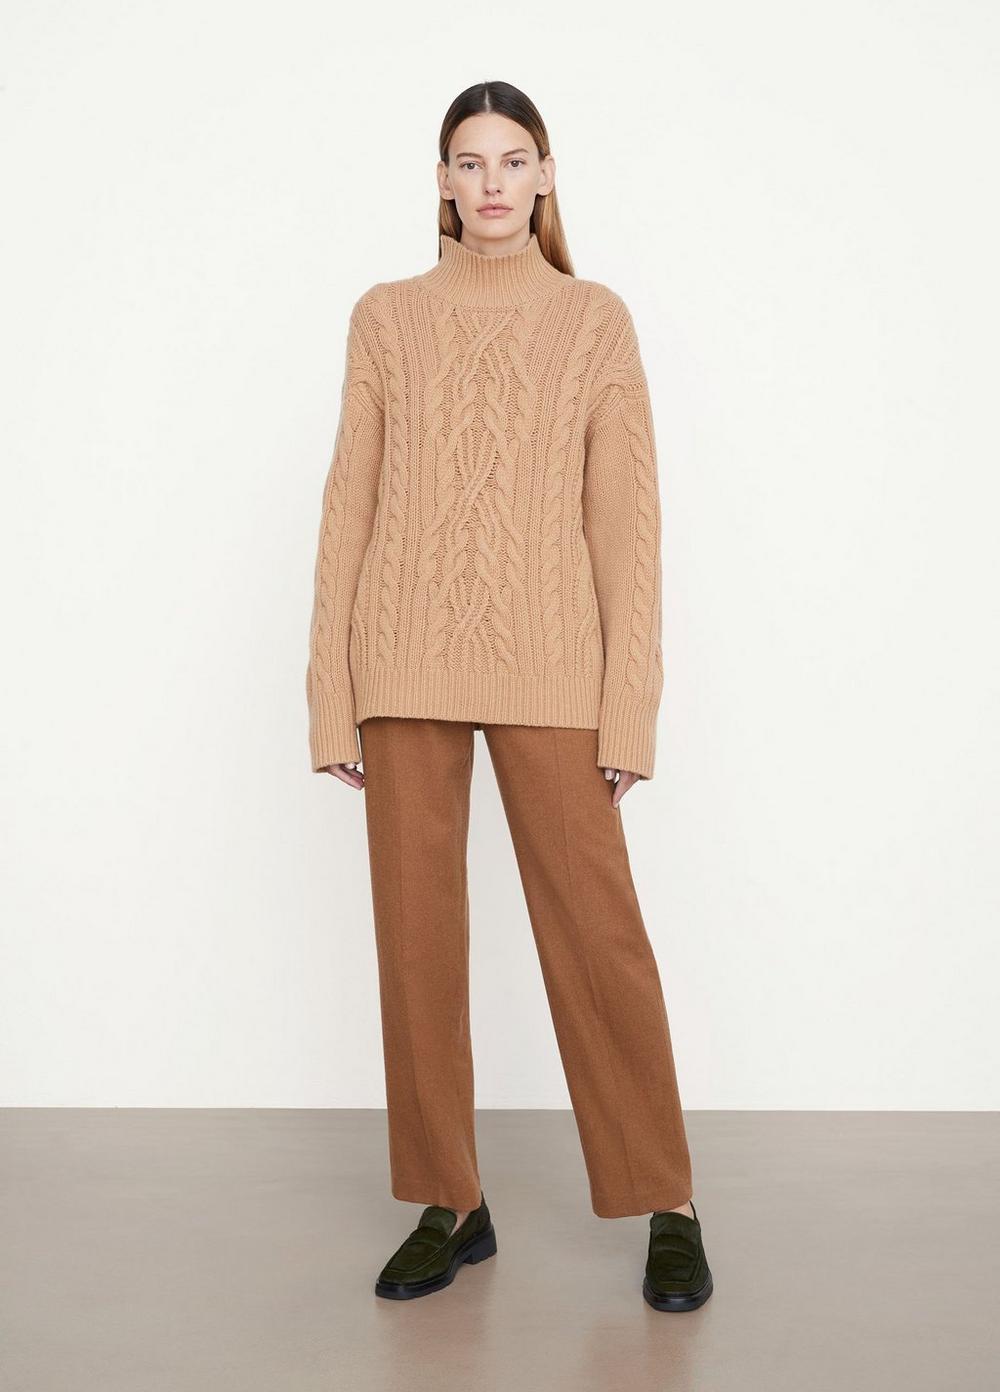 Vince Cable Knit Sweater